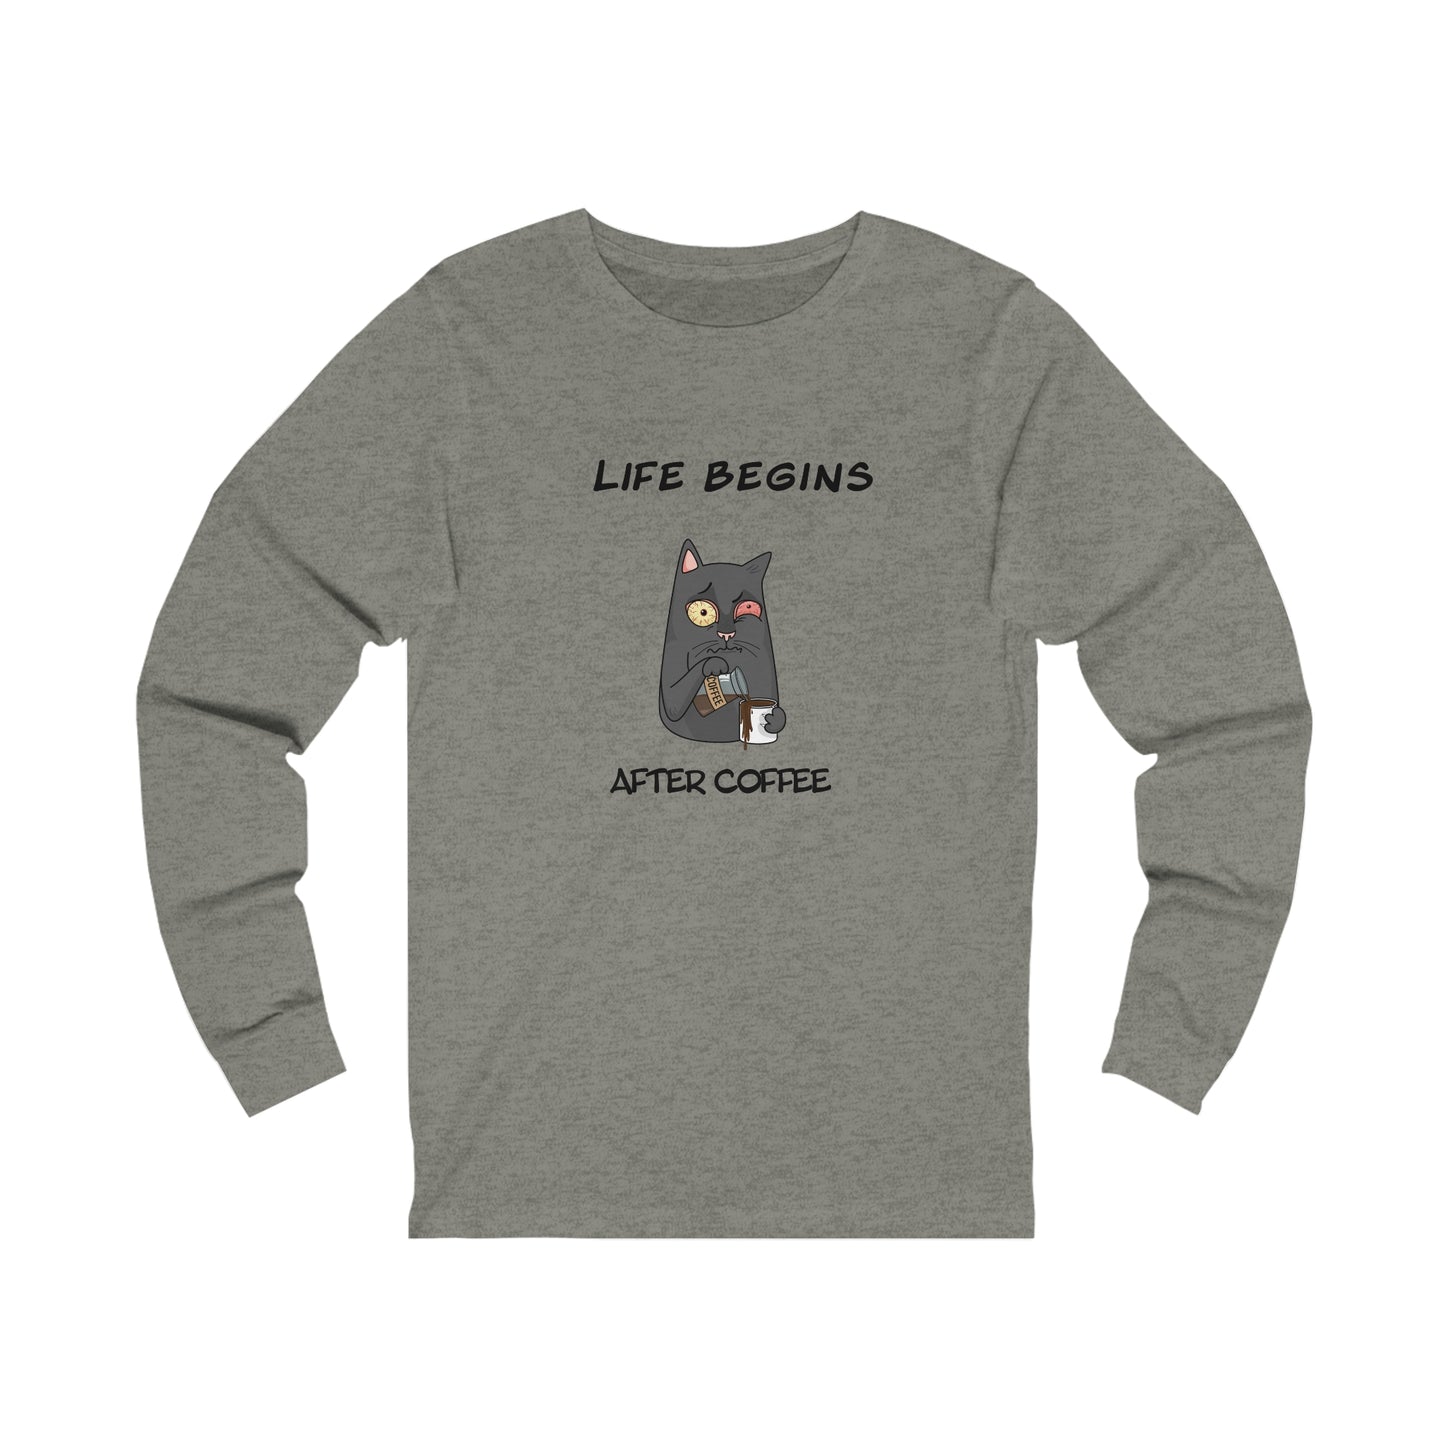 Luna The Cat. Life Begins After Coffee. Unisex Jersey Long Sleeve Tee